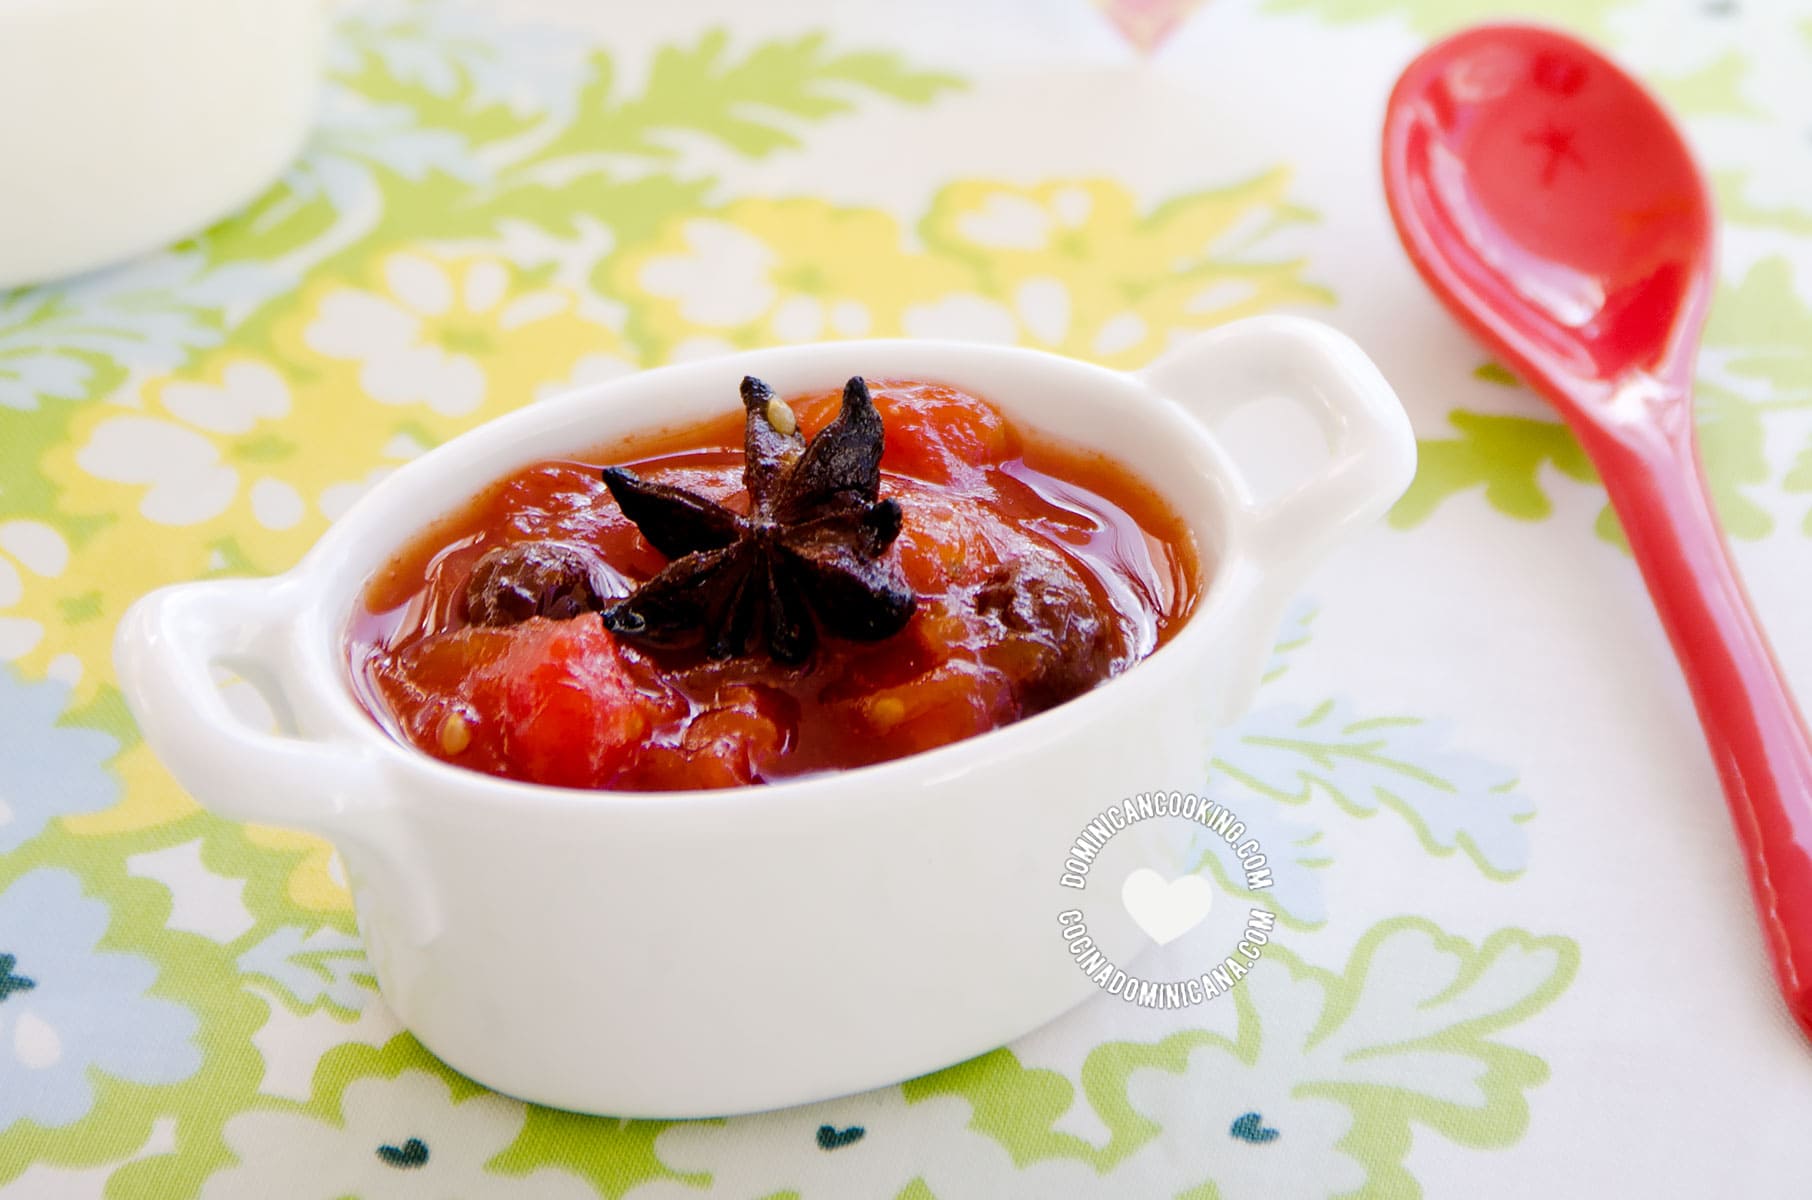 Dulce de tomate (tomato in spiced syrup).